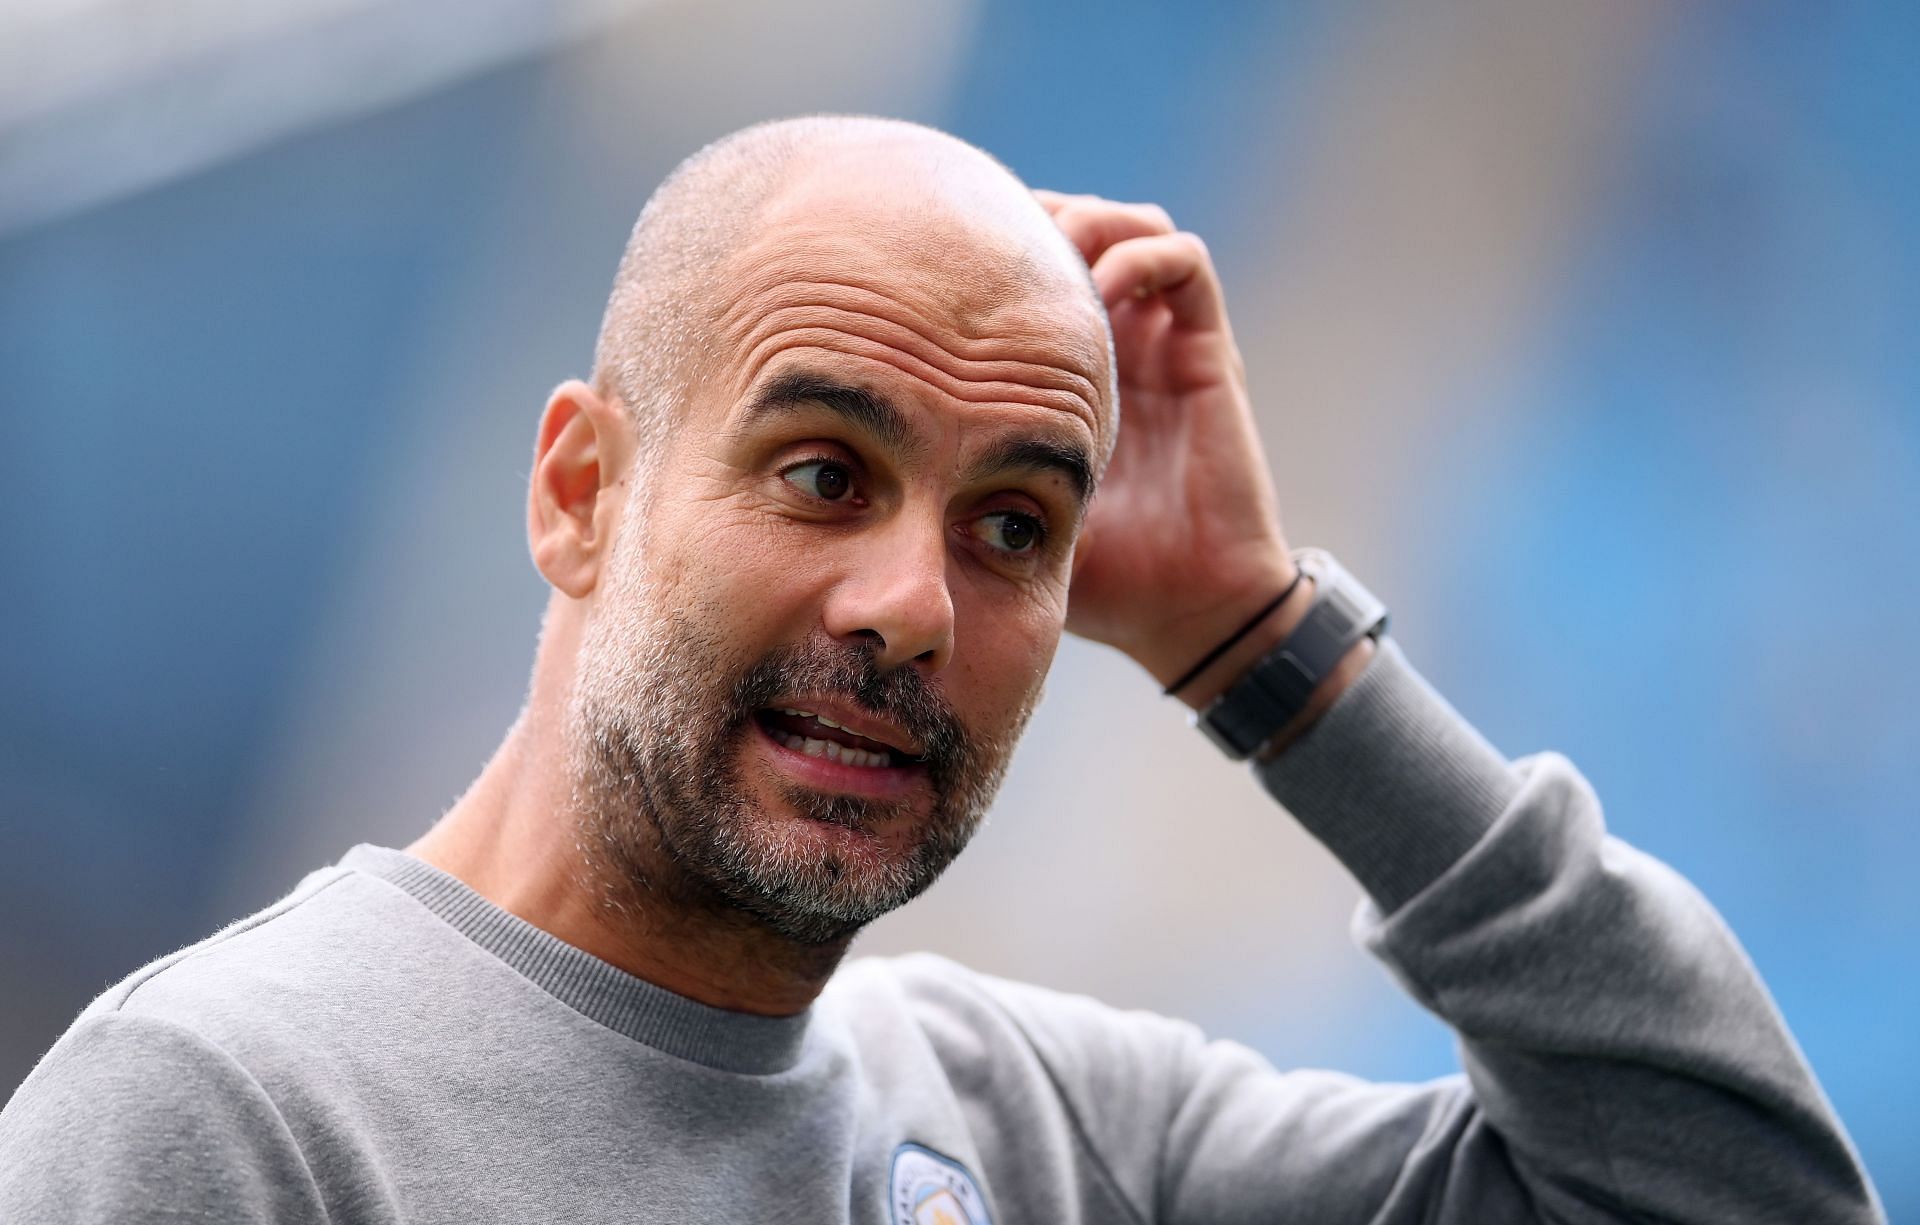 Pep Guardiola is prone to overthinking